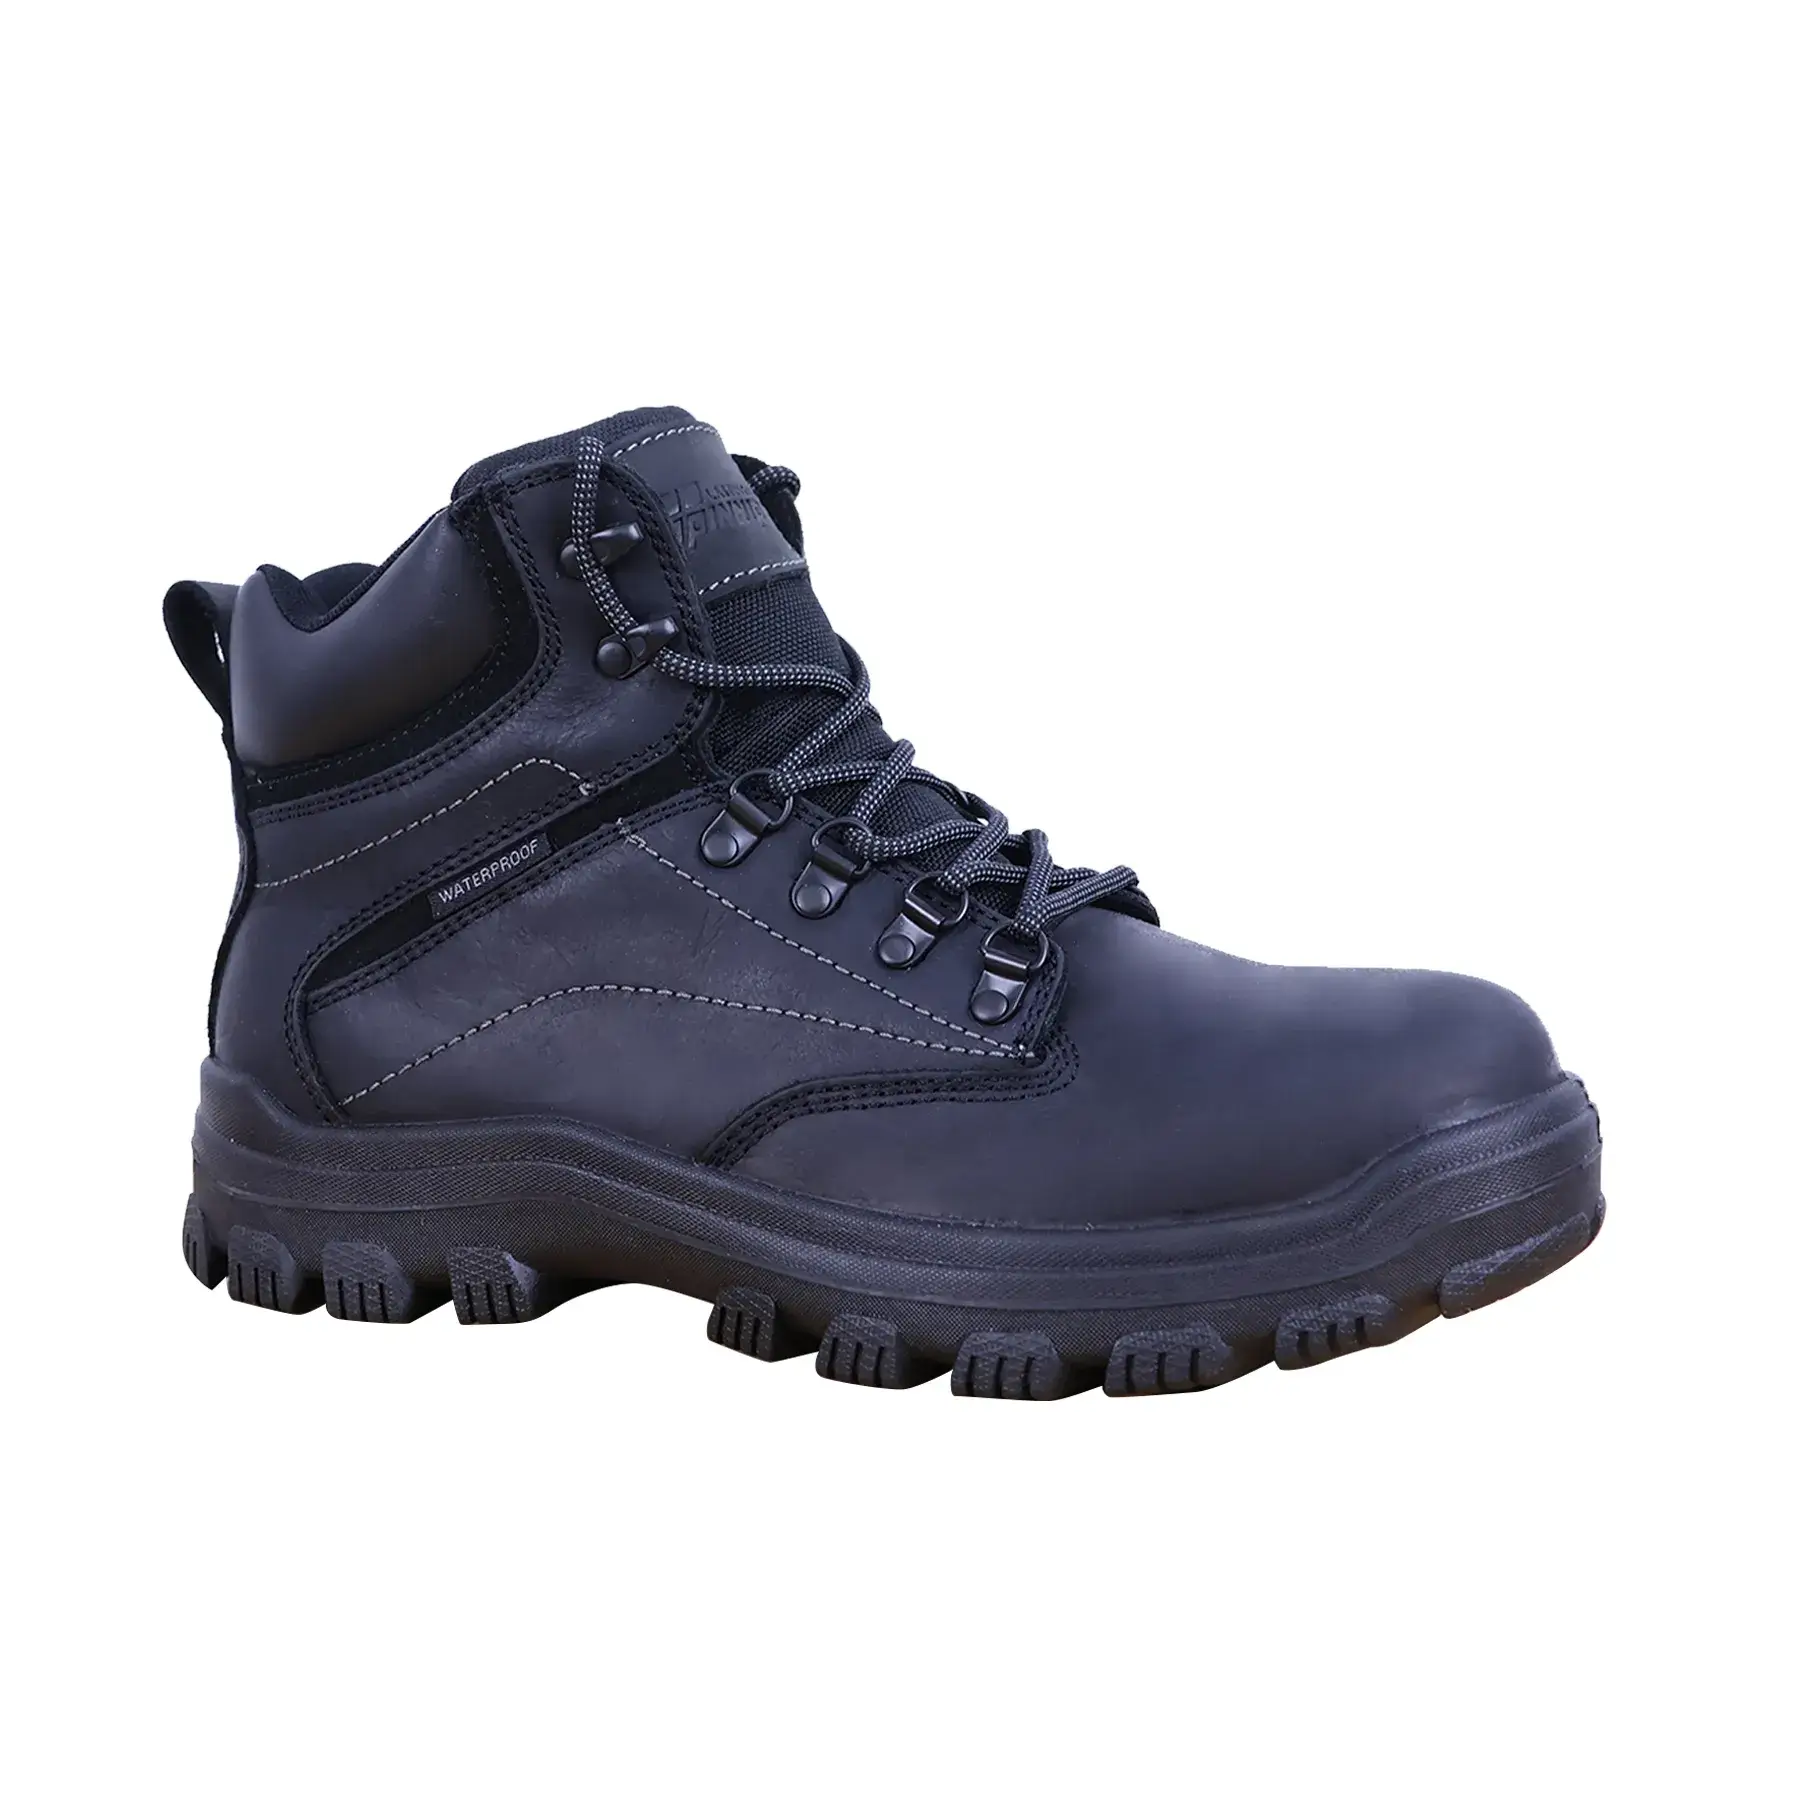 Right diagram of Steel toe work boots Whale-Black